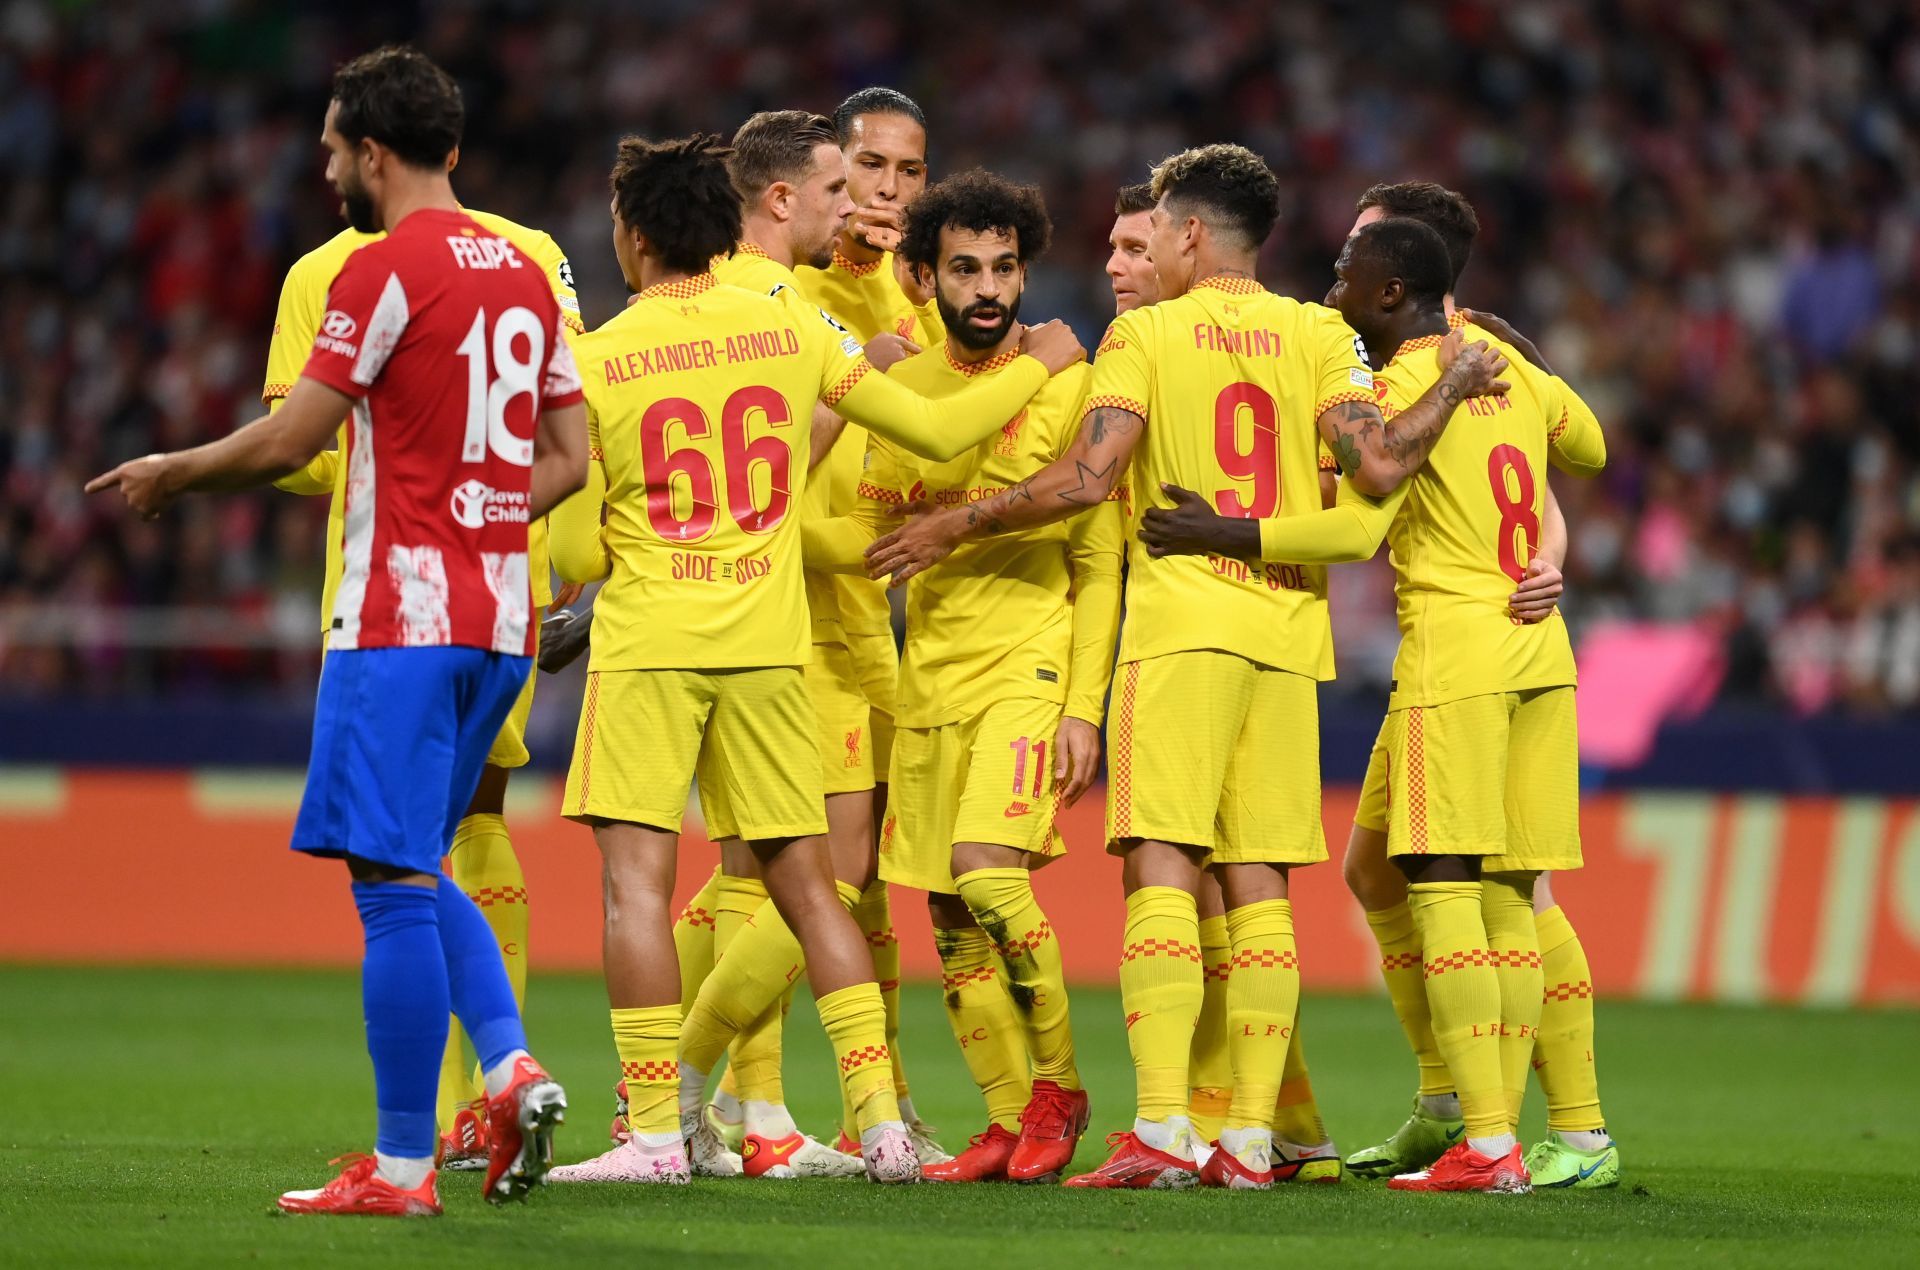 Liverpool edged out Atletico Madrid in a five-goal thriller in their UEFA Champion League clash on Tuesday.